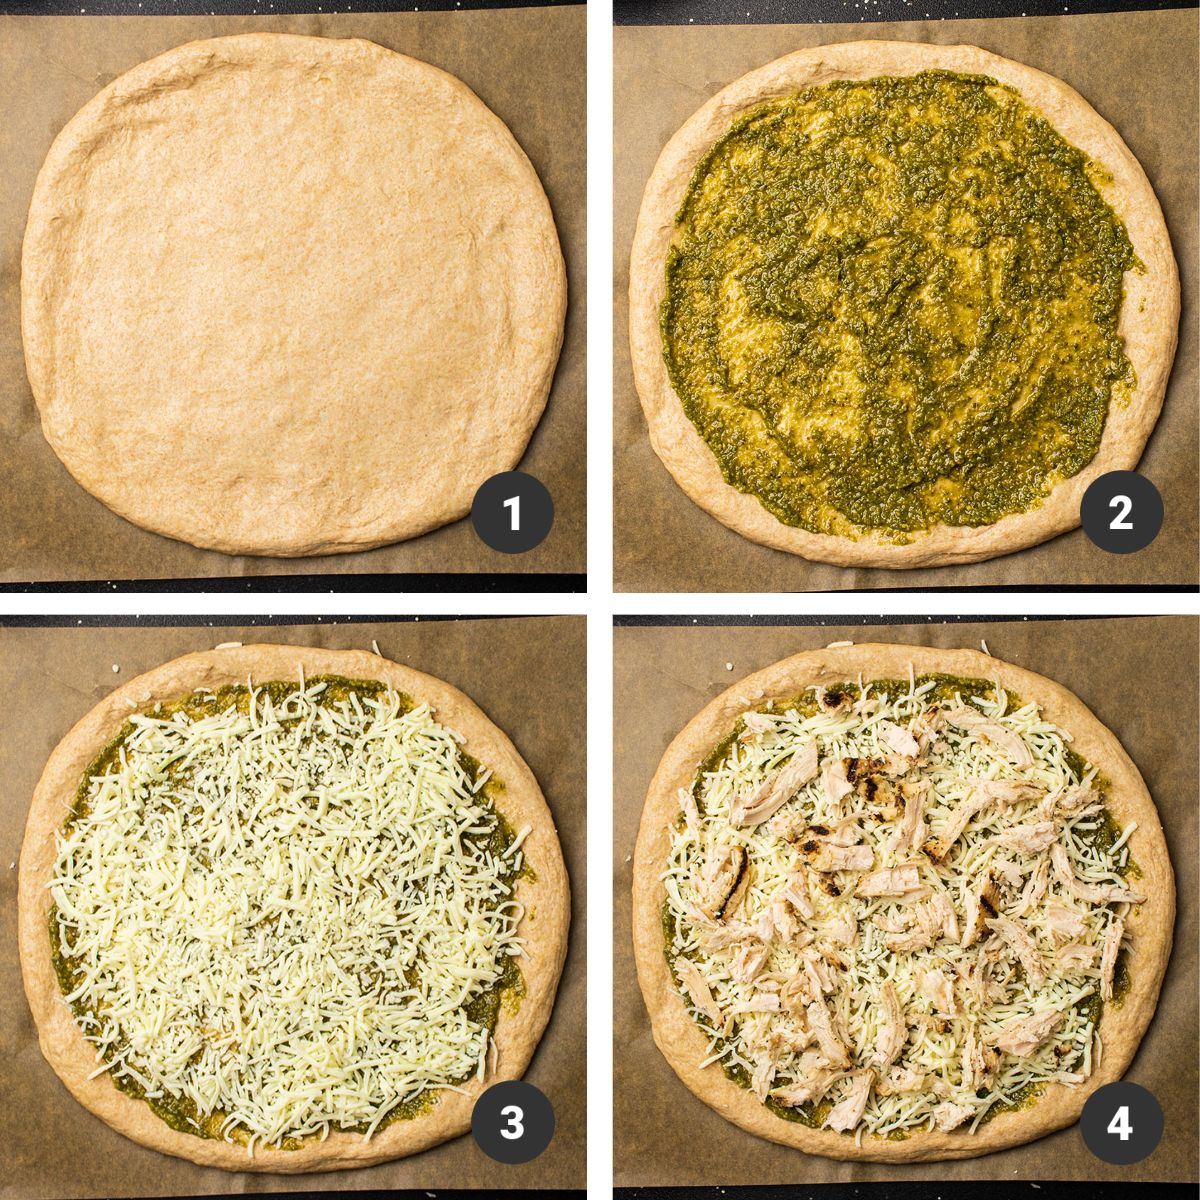 Pizza dough topped with pesto, cheese, and shredded chicken.